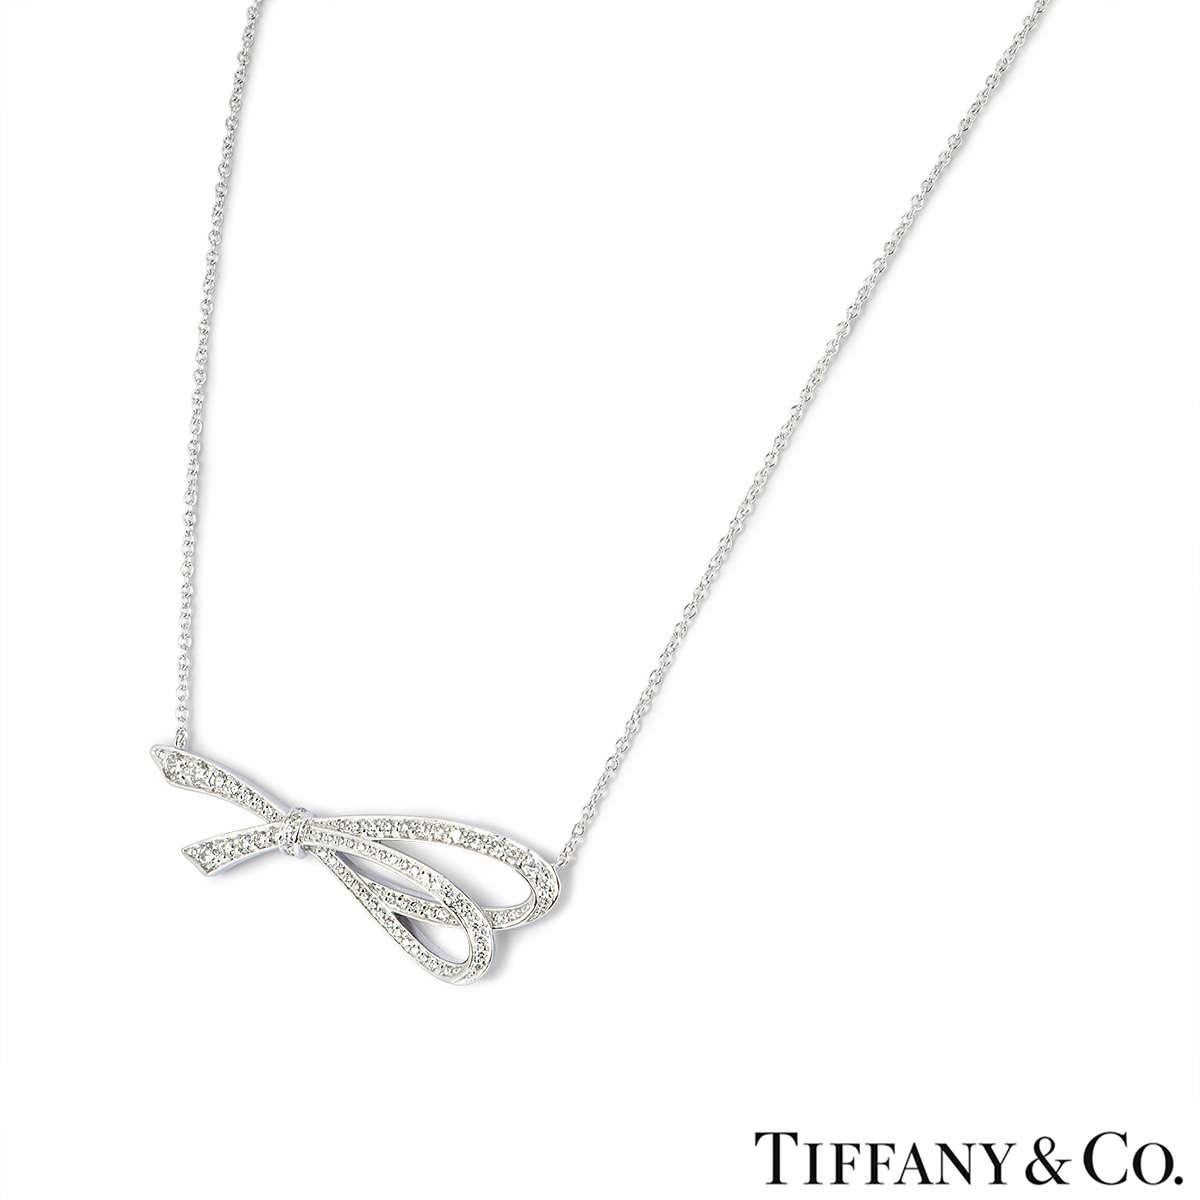 An 18k white gold diamond Bow necklace by Tiffany & Co. The openwork bow motif is set with round brilliant cut diamonds totalling approximately 0.40ct. The bow measures 4cm in width and comes on an original 16 inch chain. The necklace has a gross